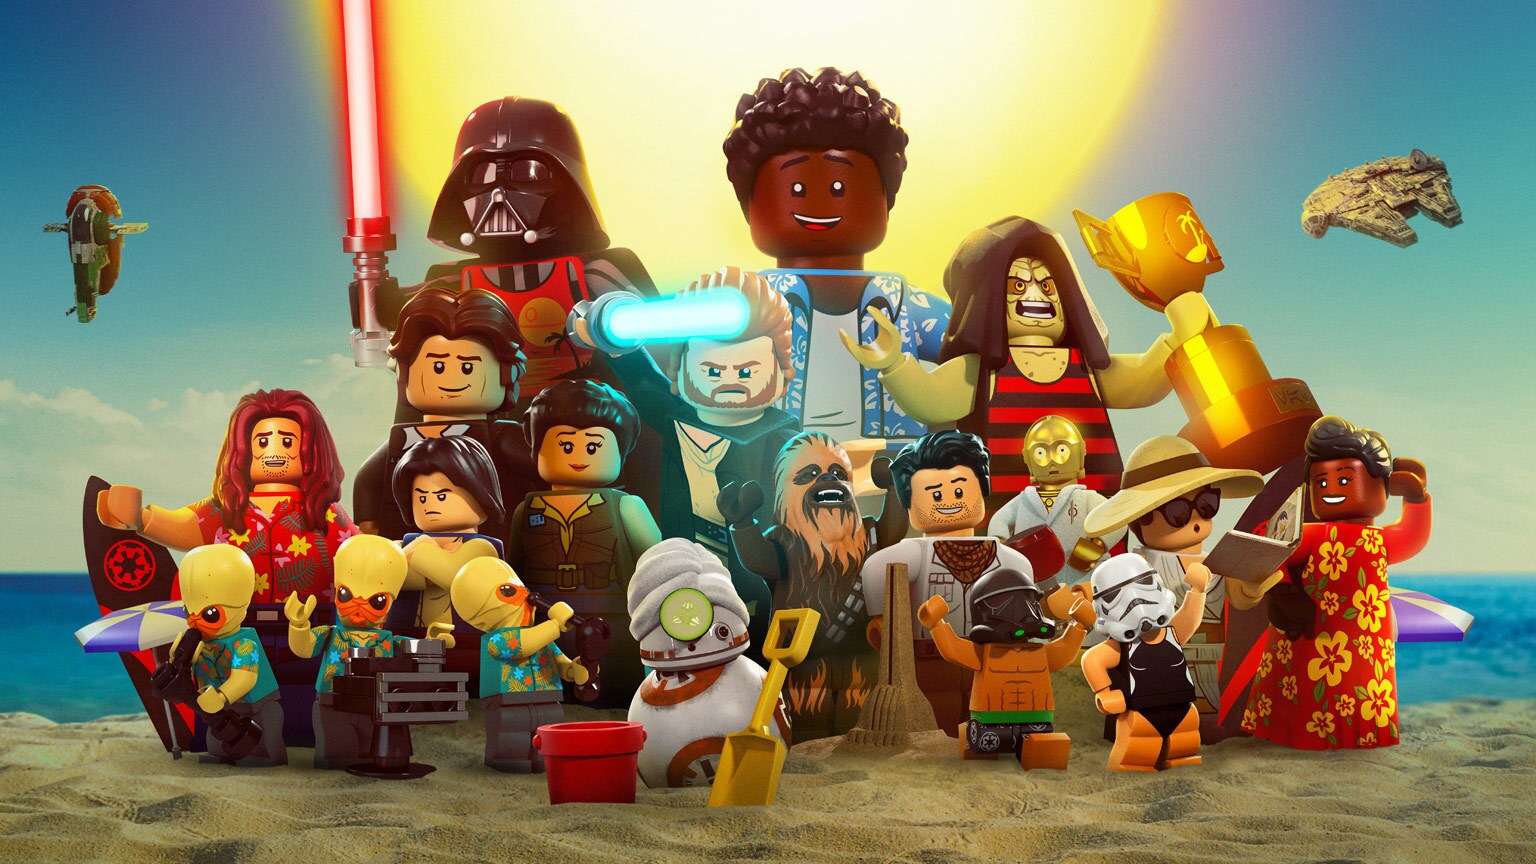 LEGO Star Wars Summer Vacation Is Here!